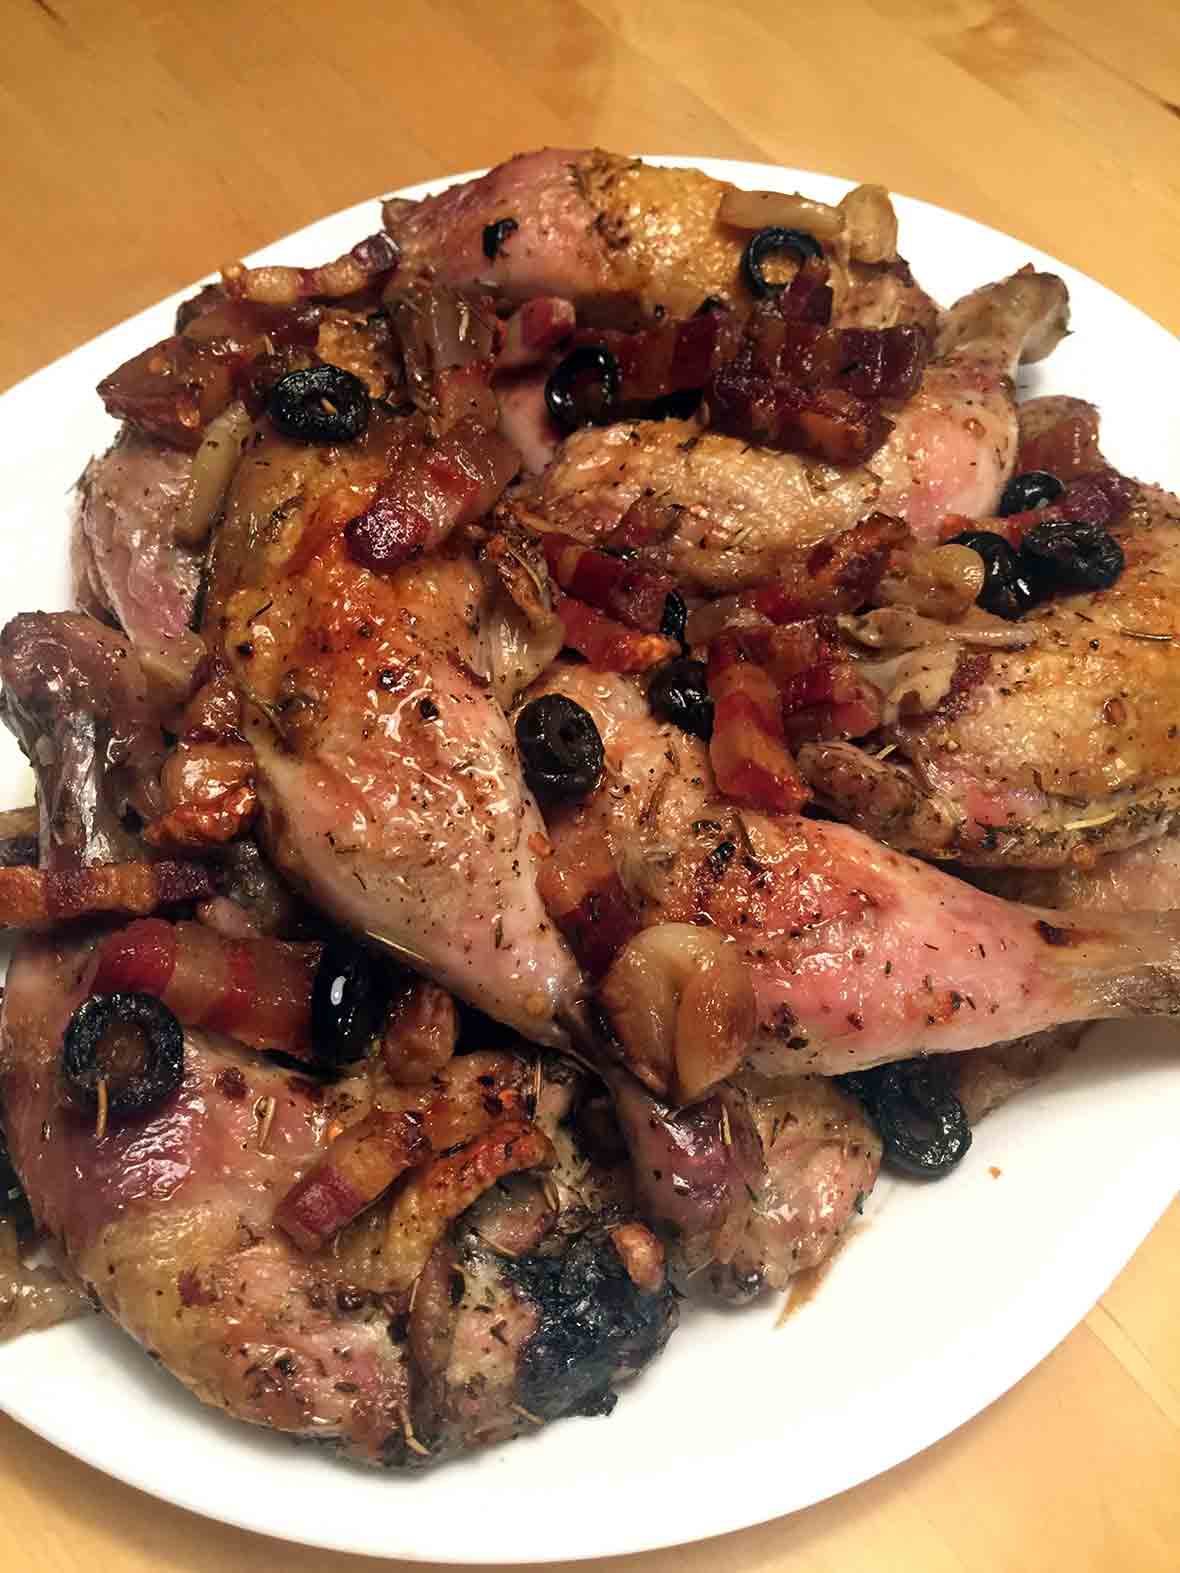 A platter of roast chicken with pancetta and olives